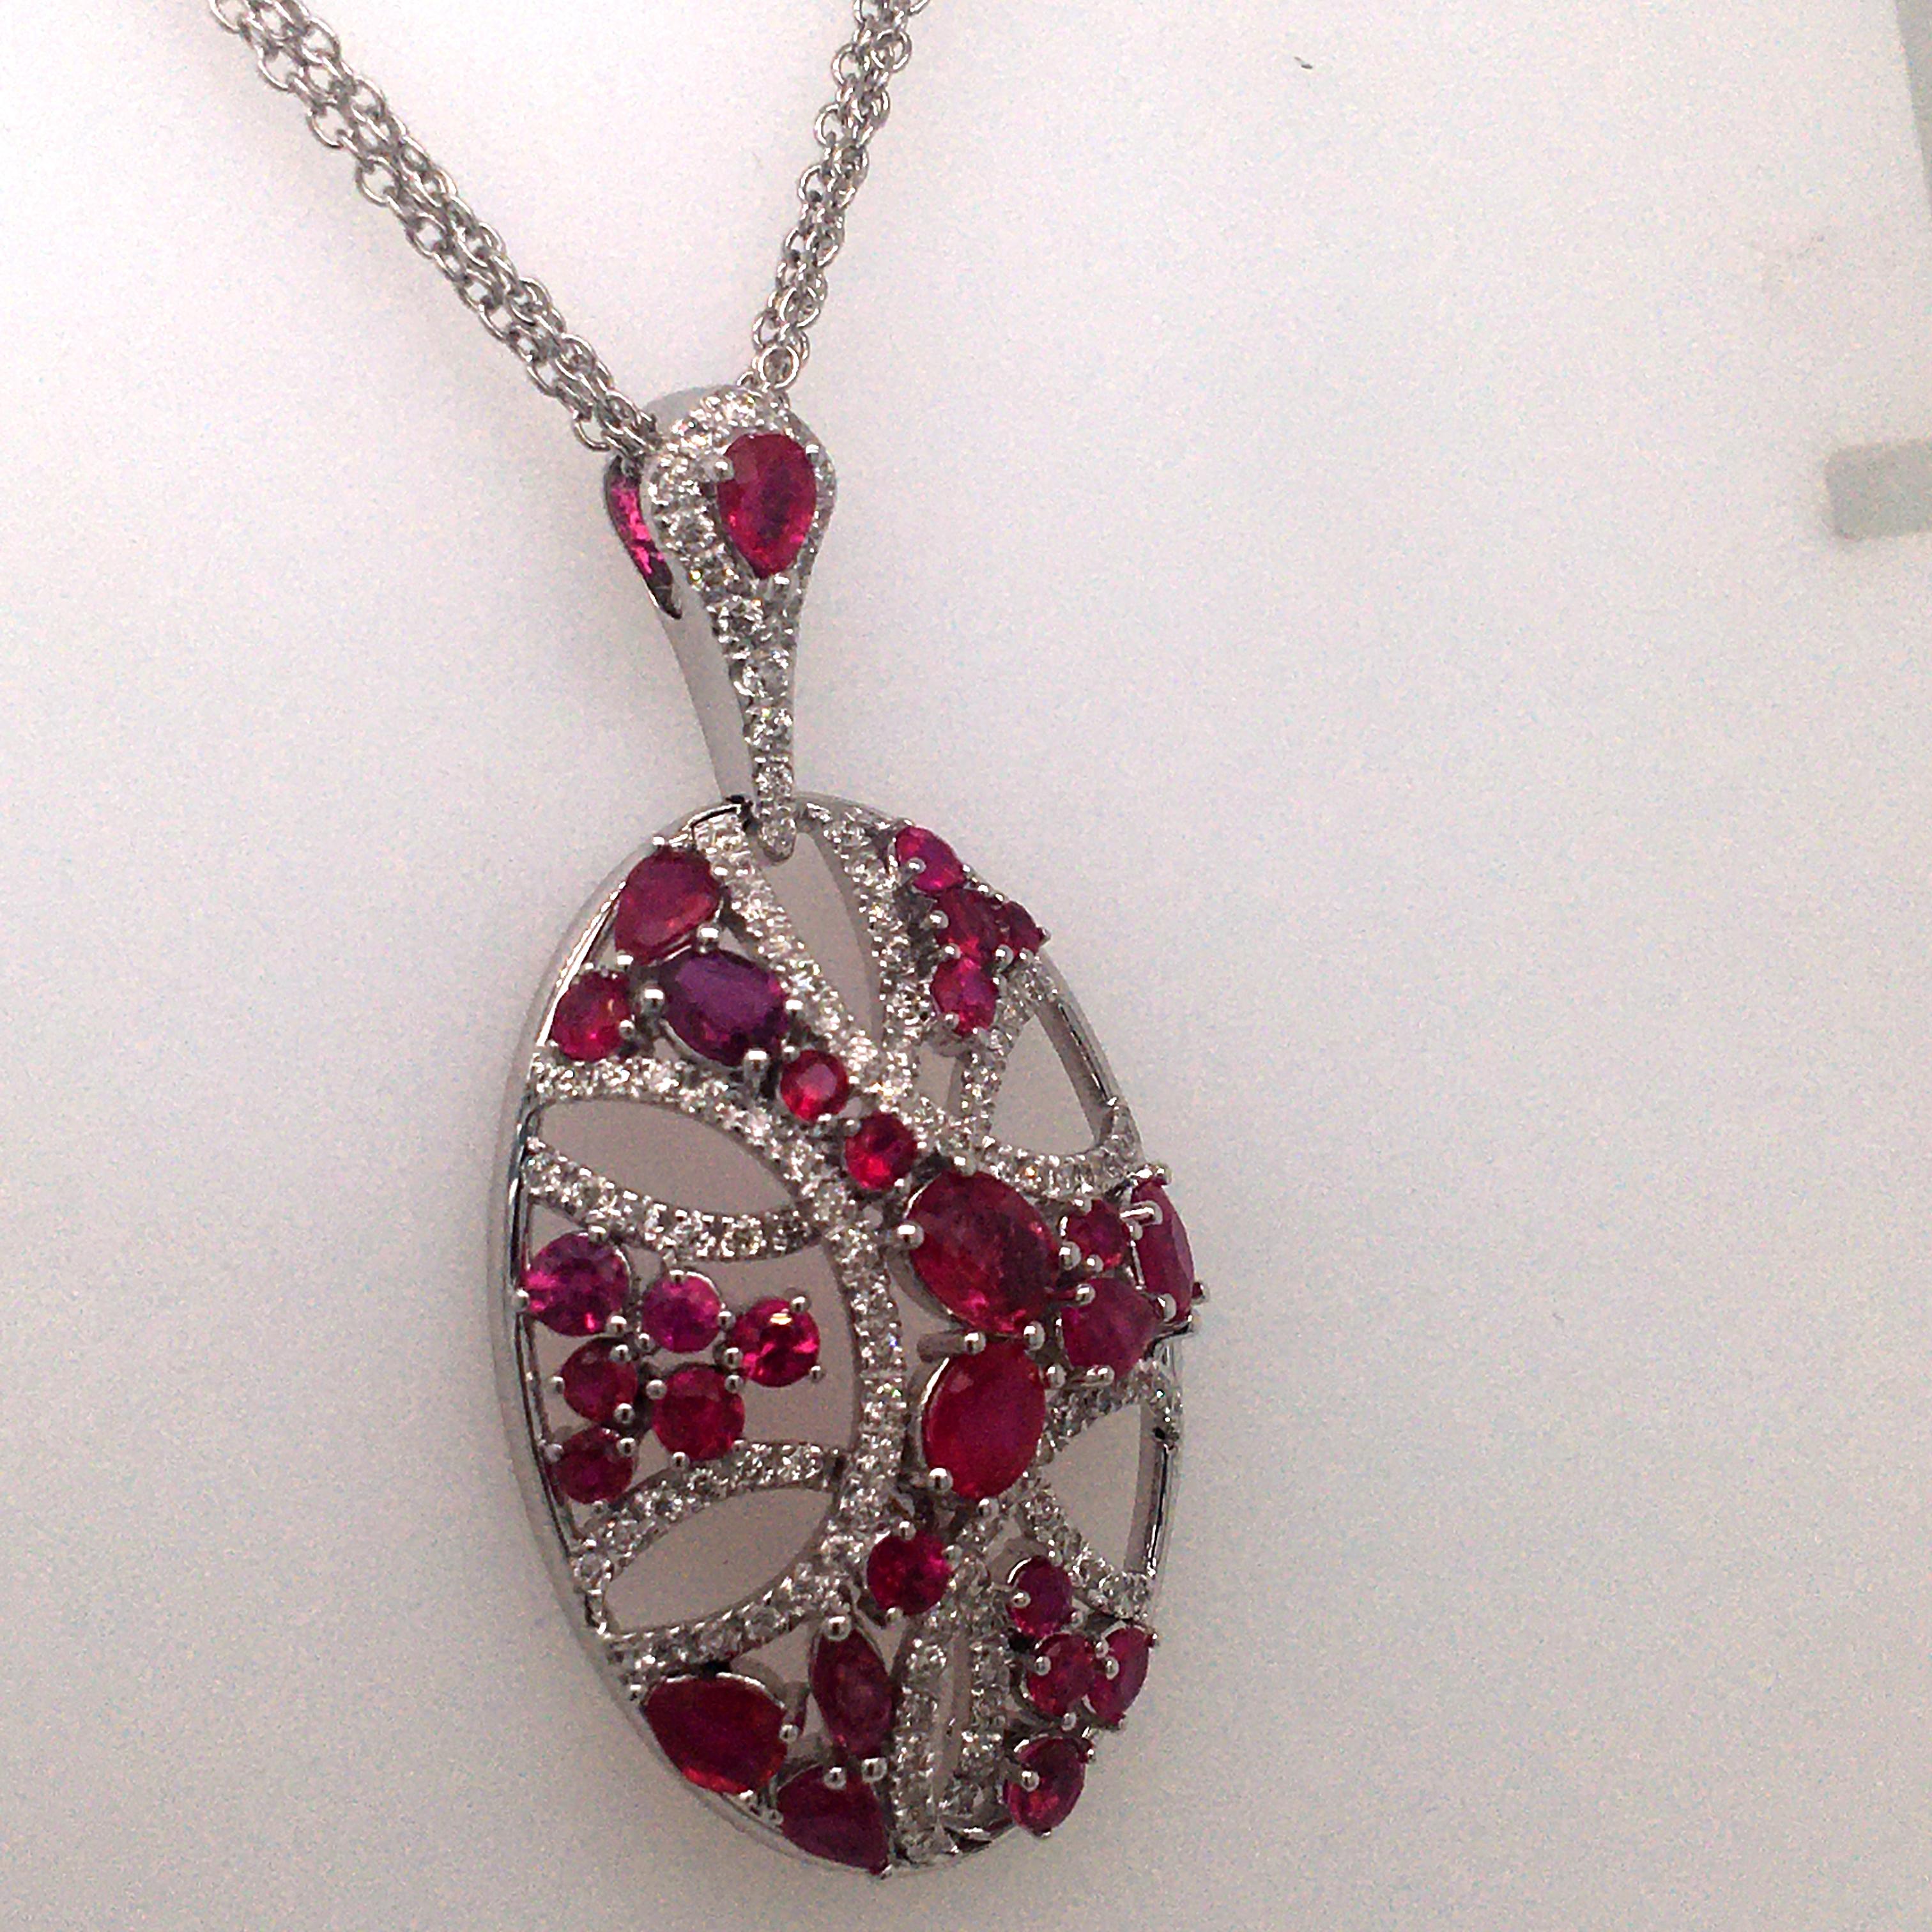 Women's 18 Karat White Gold Pendent Set with Diamonds and Ruby Made in Italy